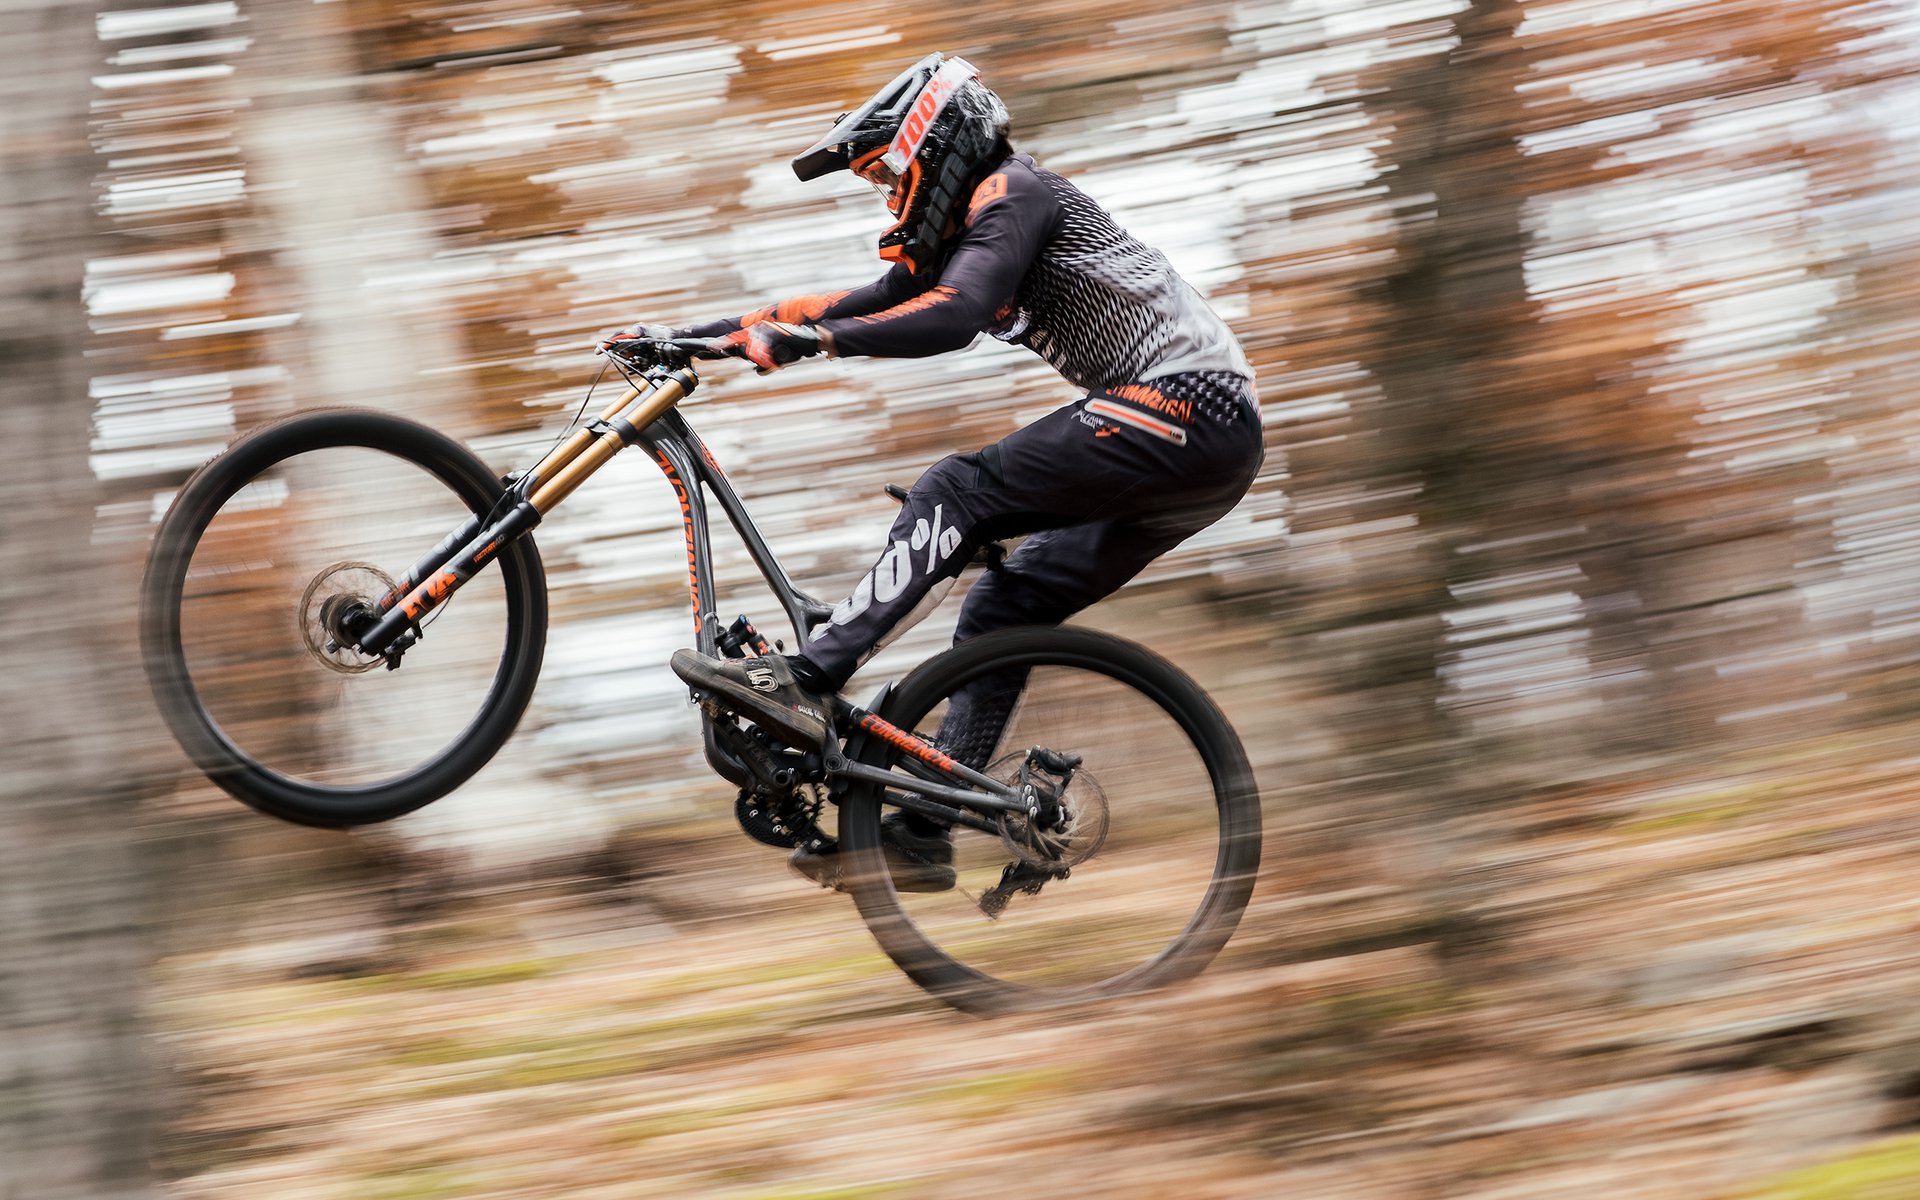 Amaury Pierron on the Commencal Supreme DH